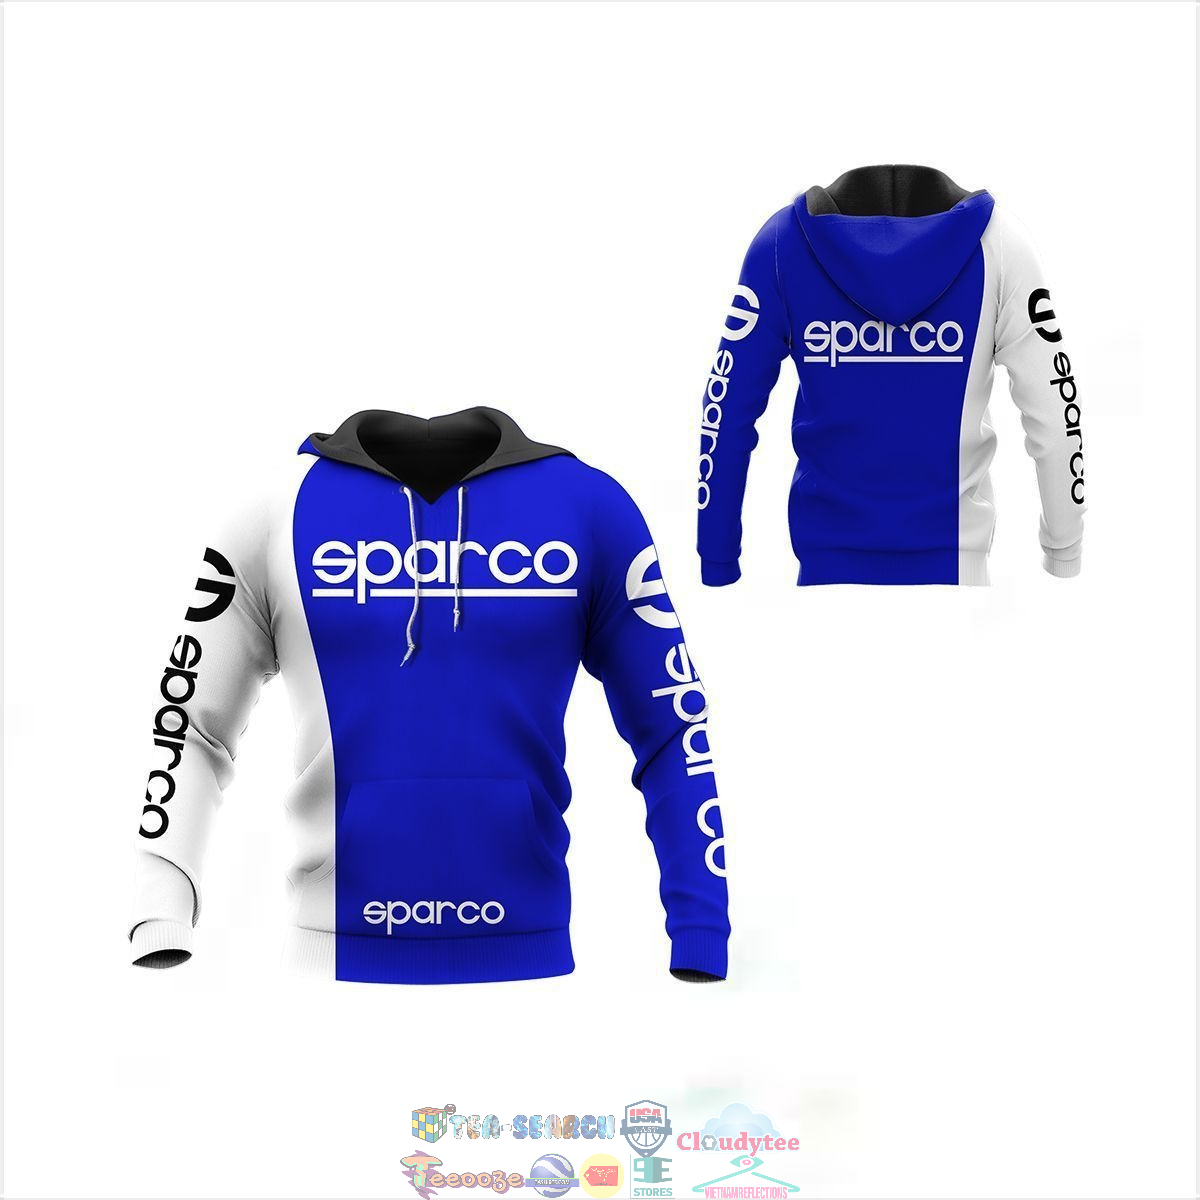 Sparco ver 65 3D hoodie and t-shirt